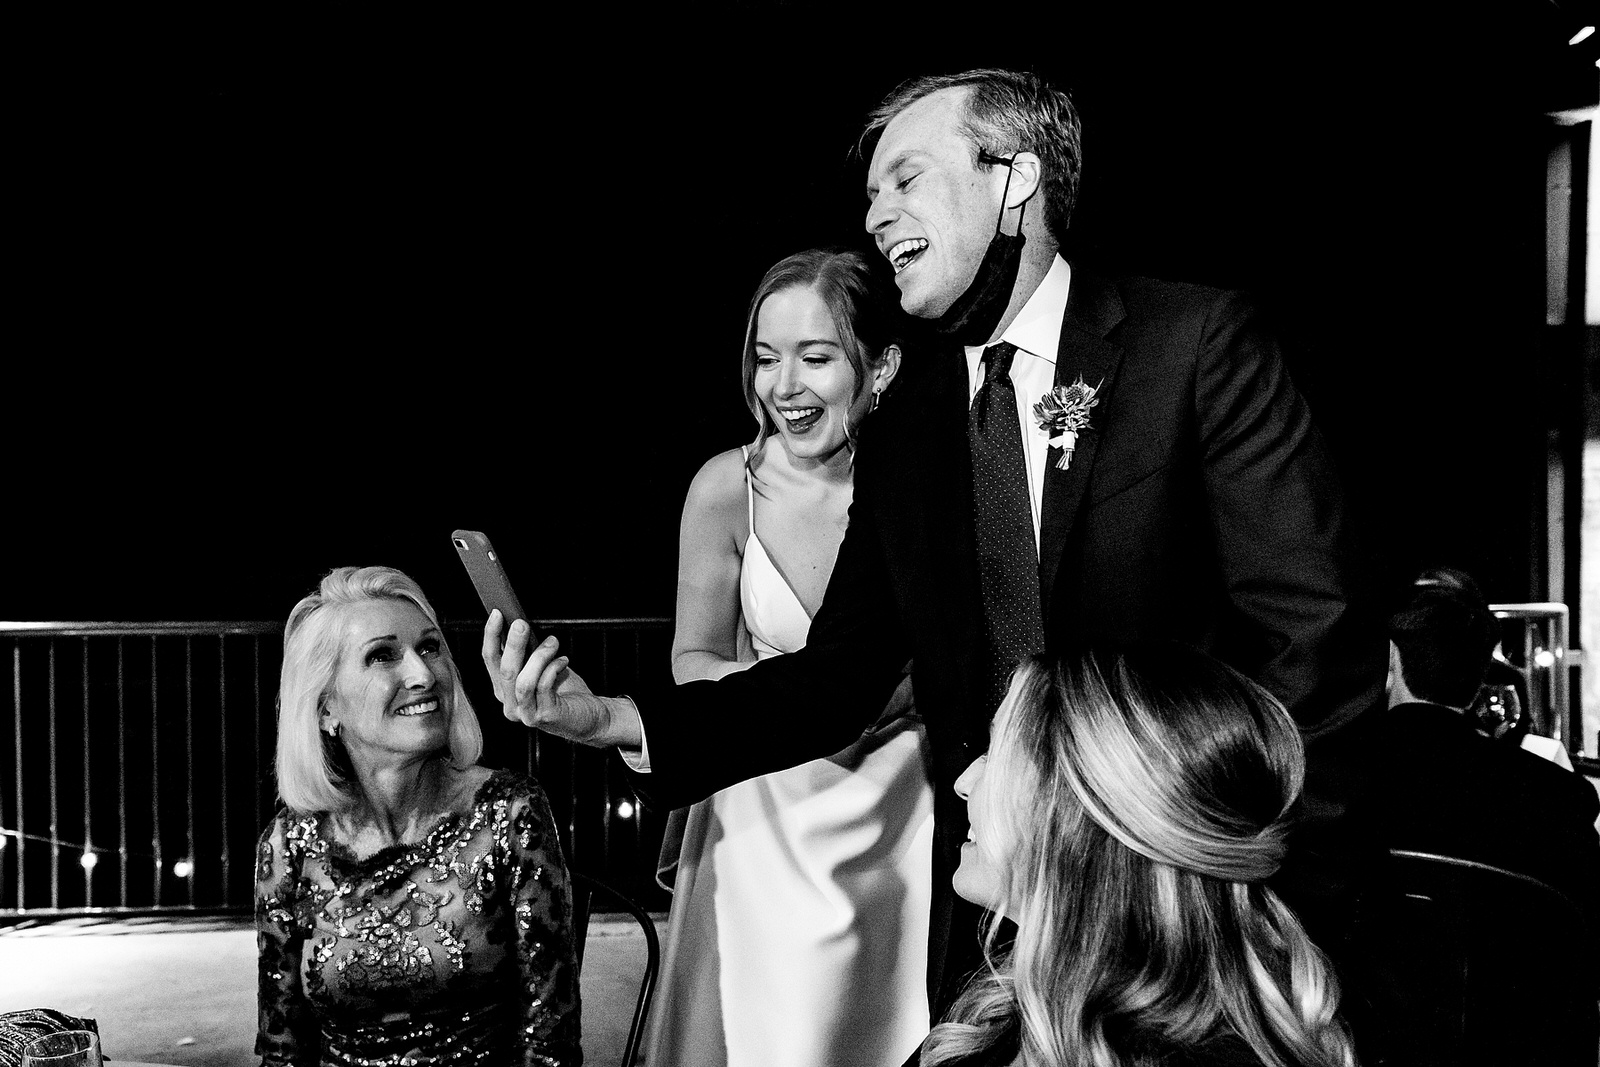 newlyweds facetime with friends during their wedding reception after having to downsize due to Covid19